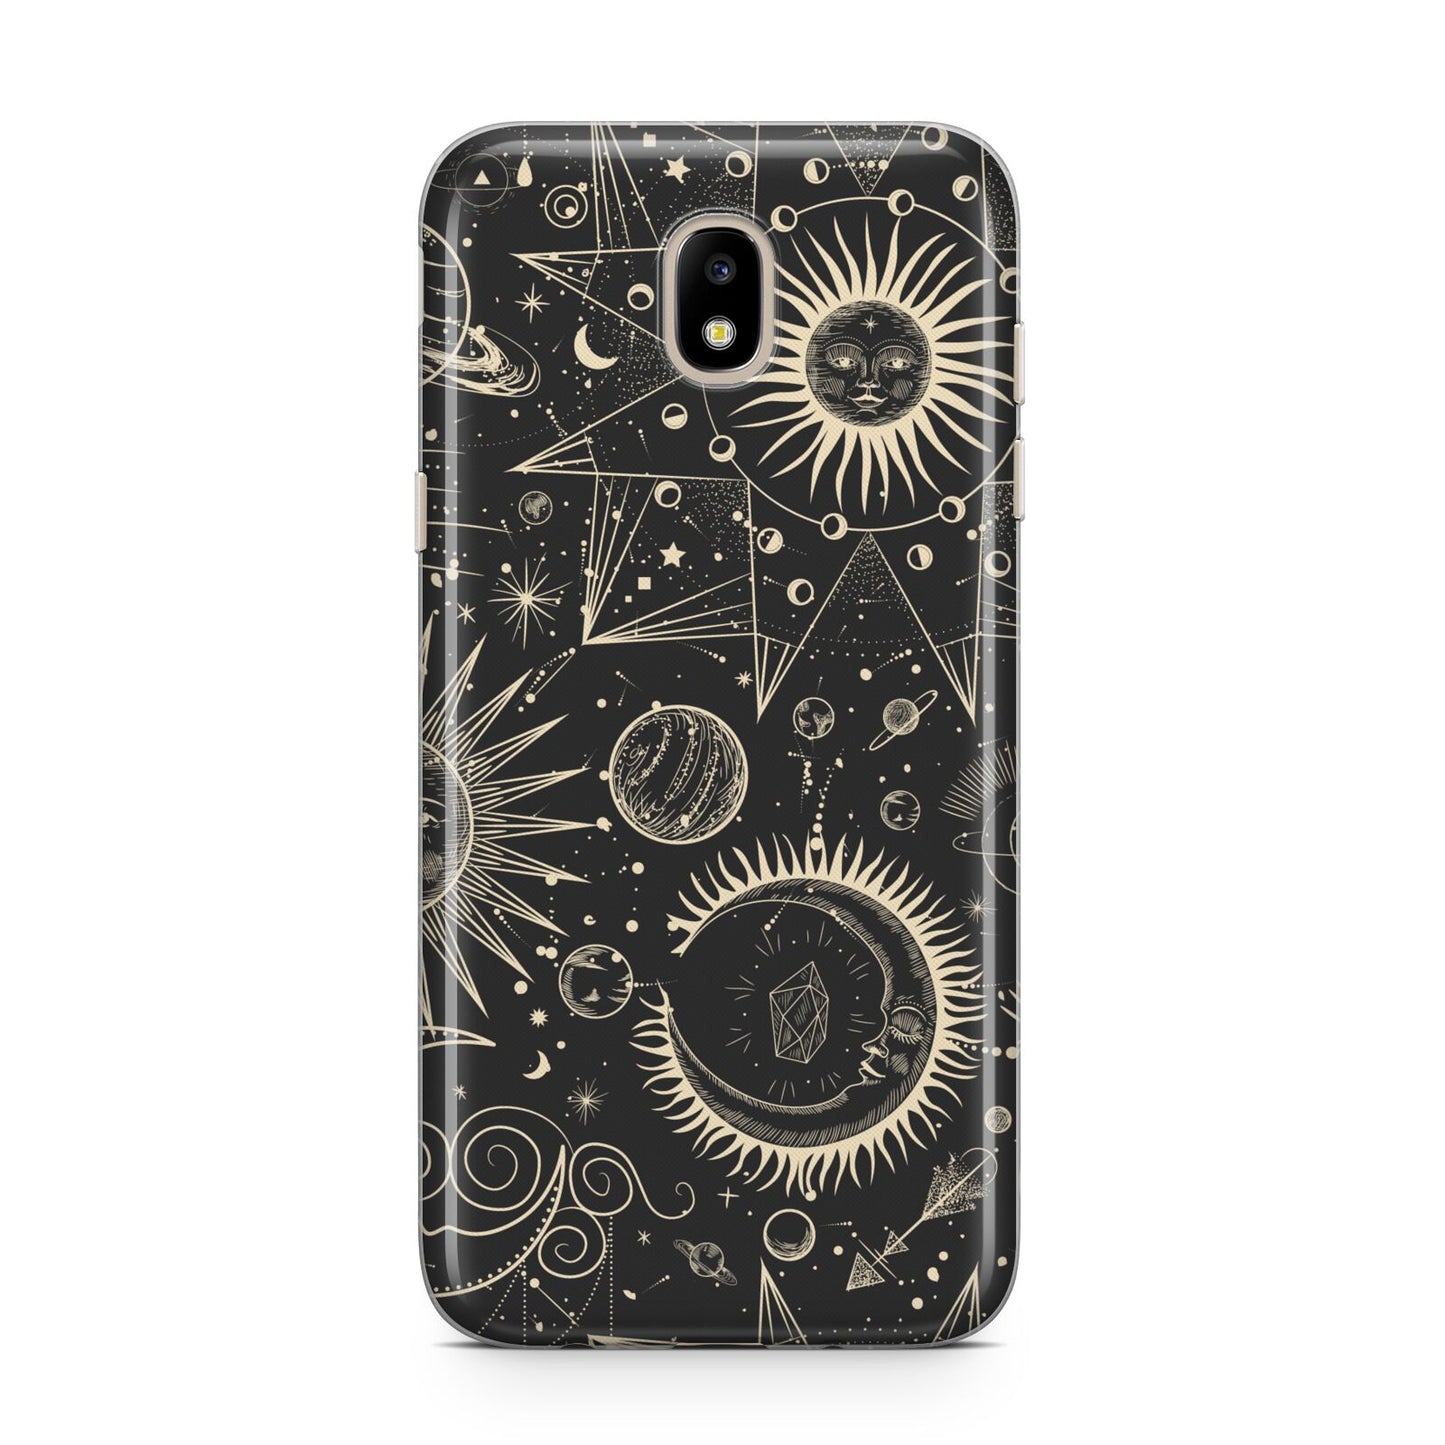 Moon Phases Samsung J5 2017 Case